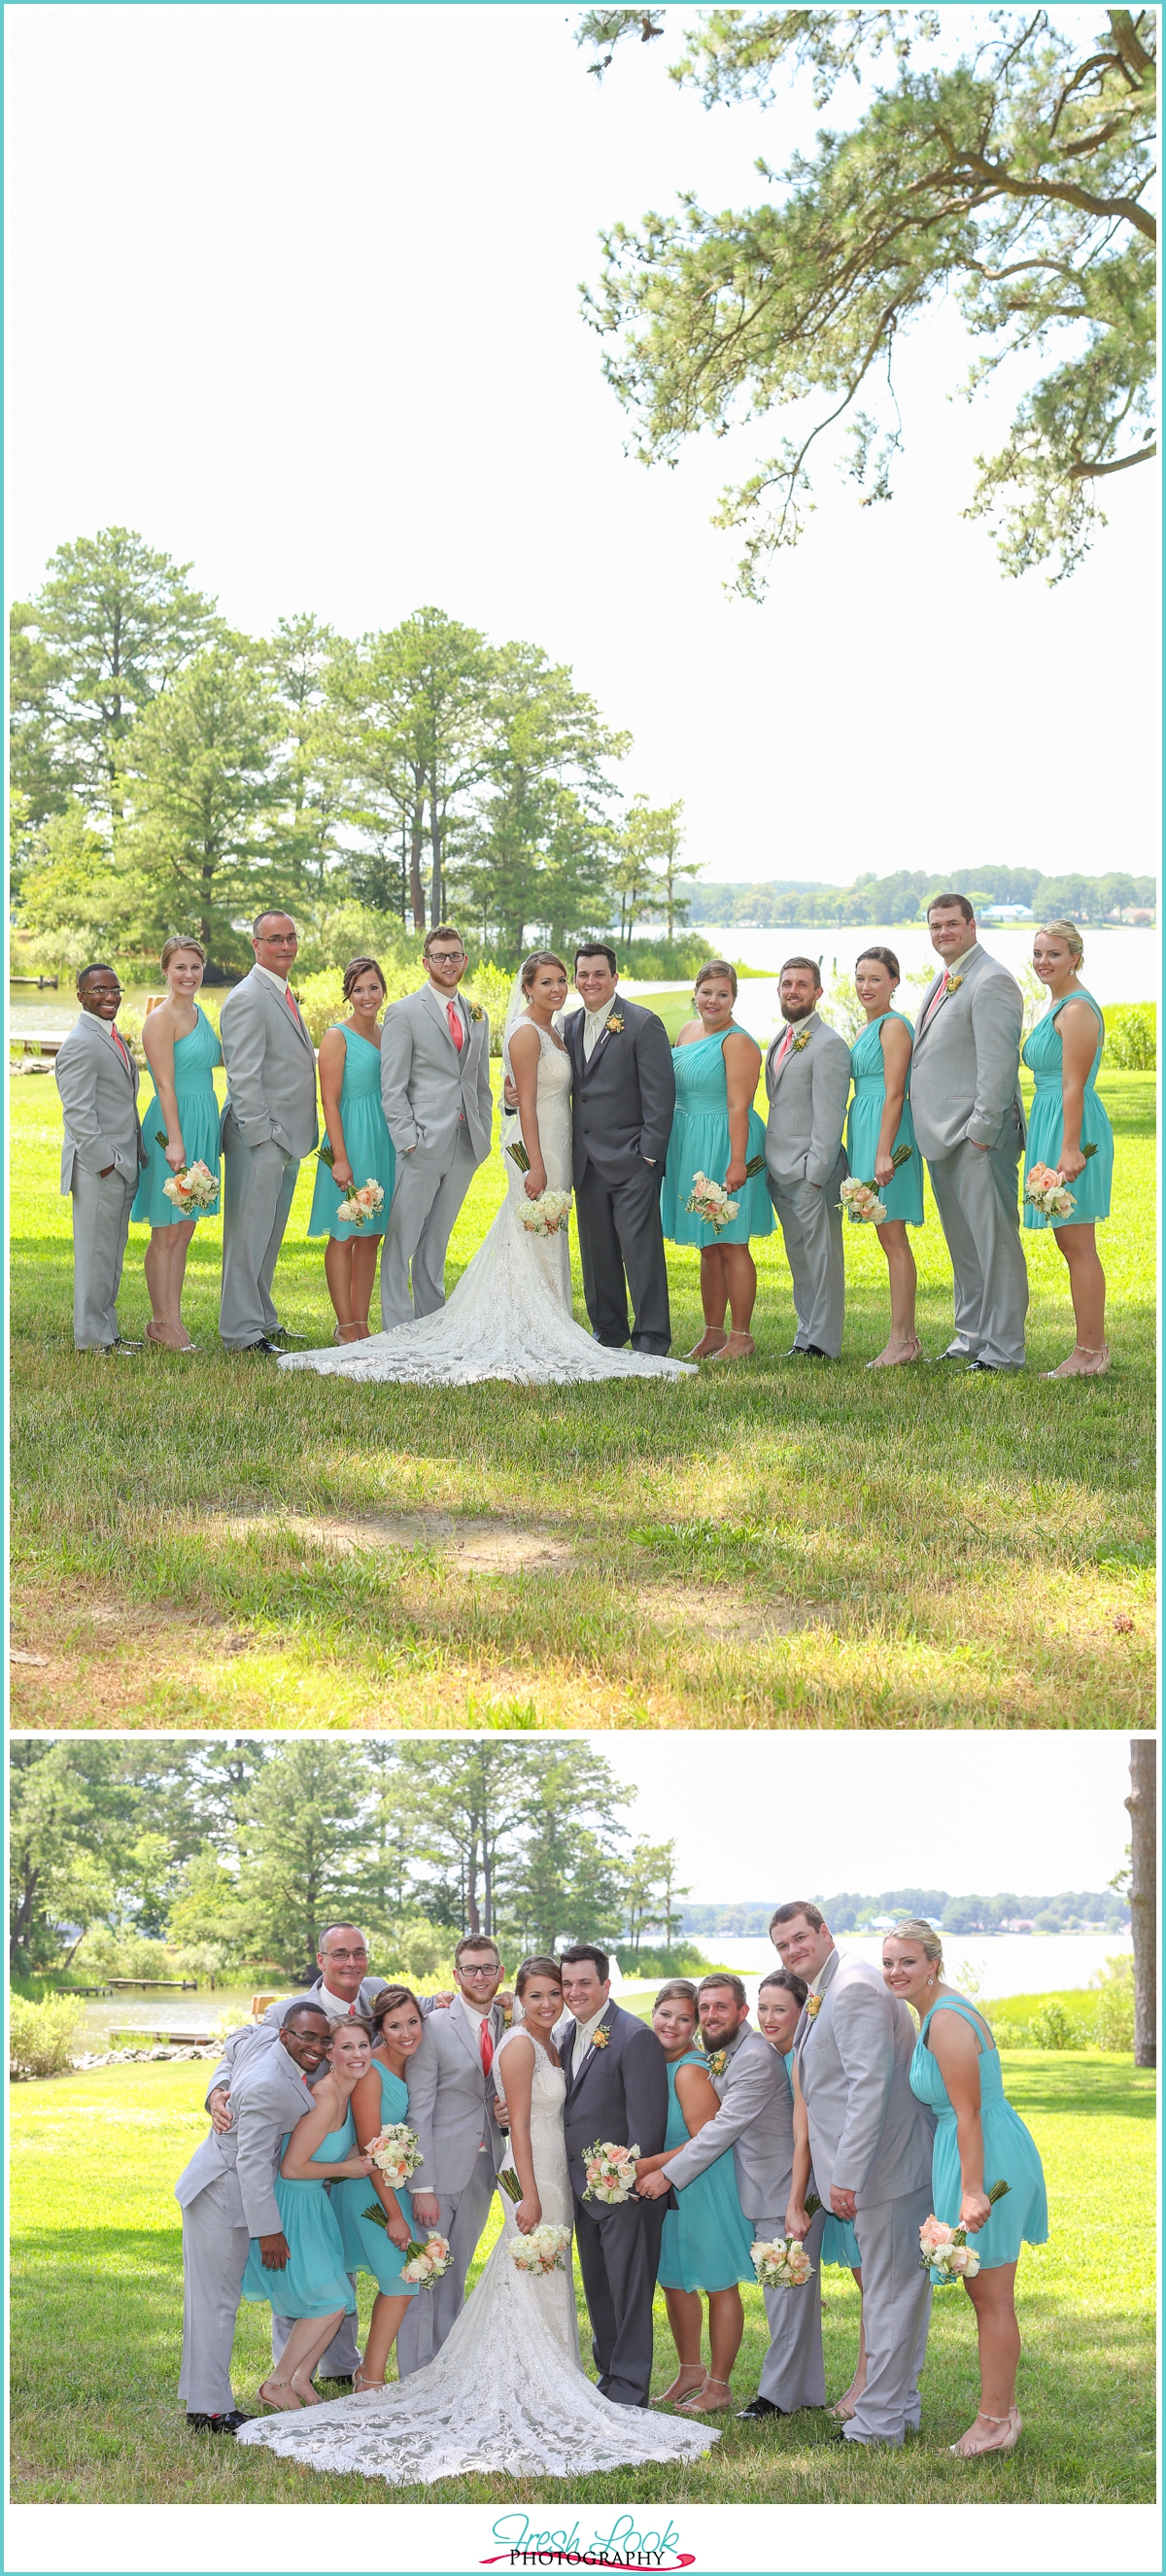 teal and gray bridal party